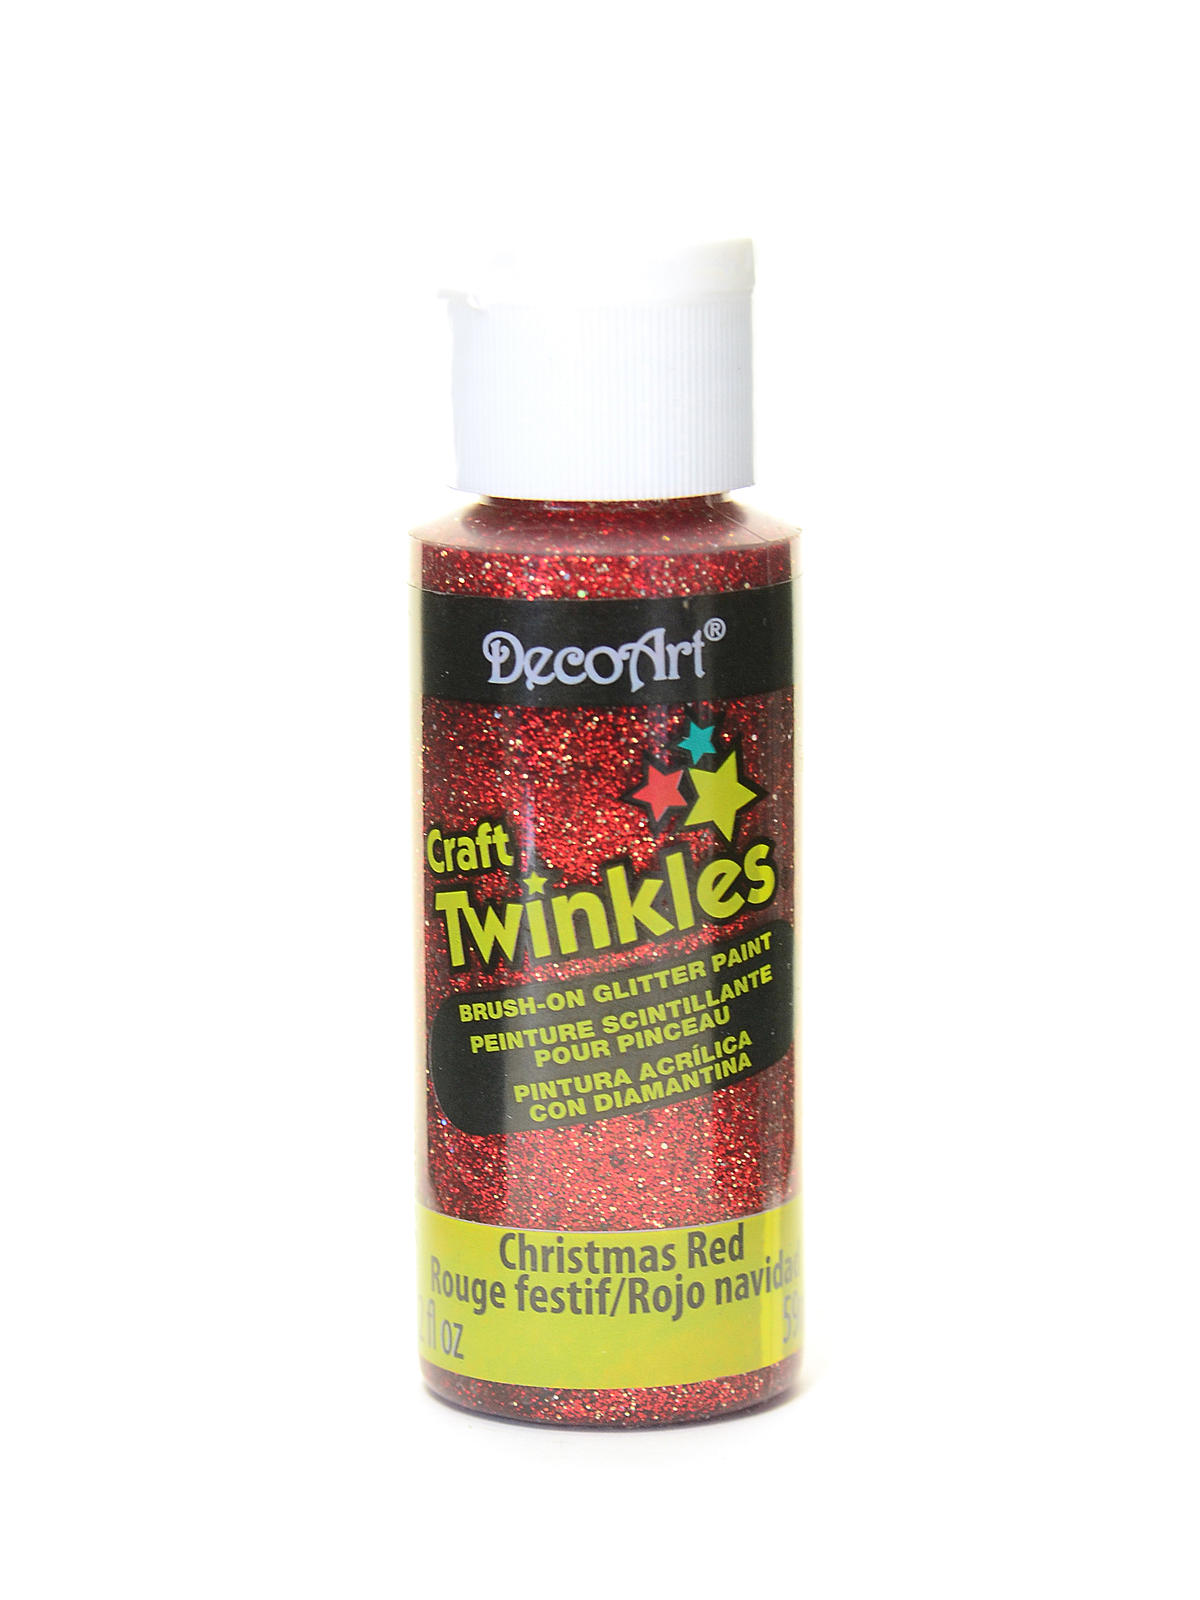 Craft Twinkles Glitter Paint Christmas Red